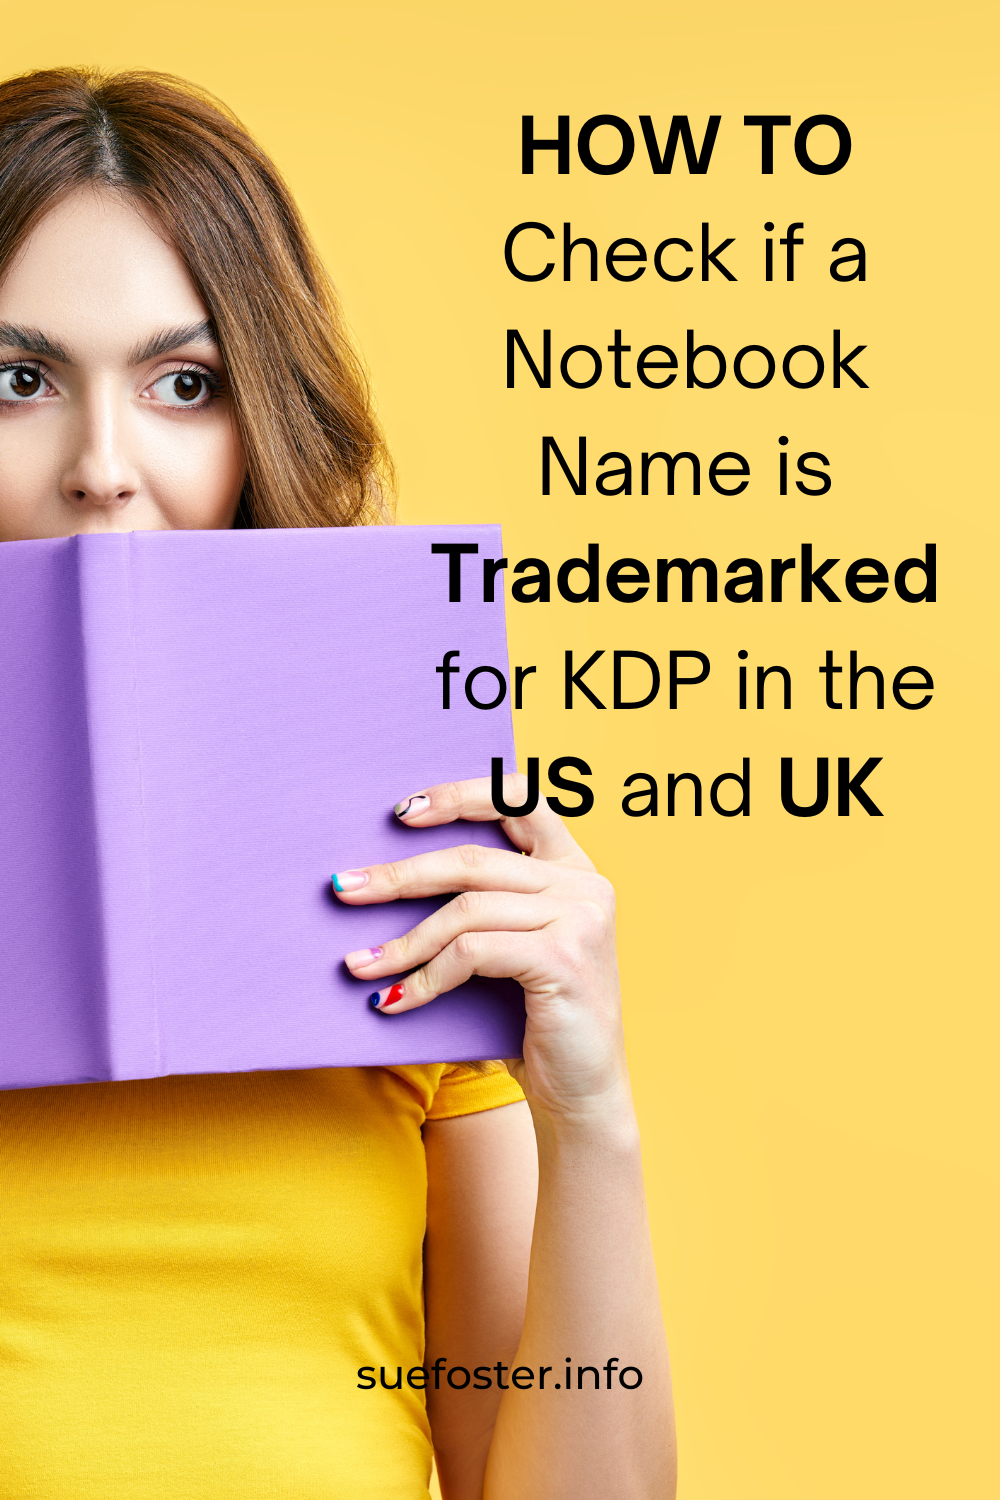 Learn how to protect your KDP book from trademark issues in the US and UK. Follow simple steps to check trademarks and avoid legal troubles.